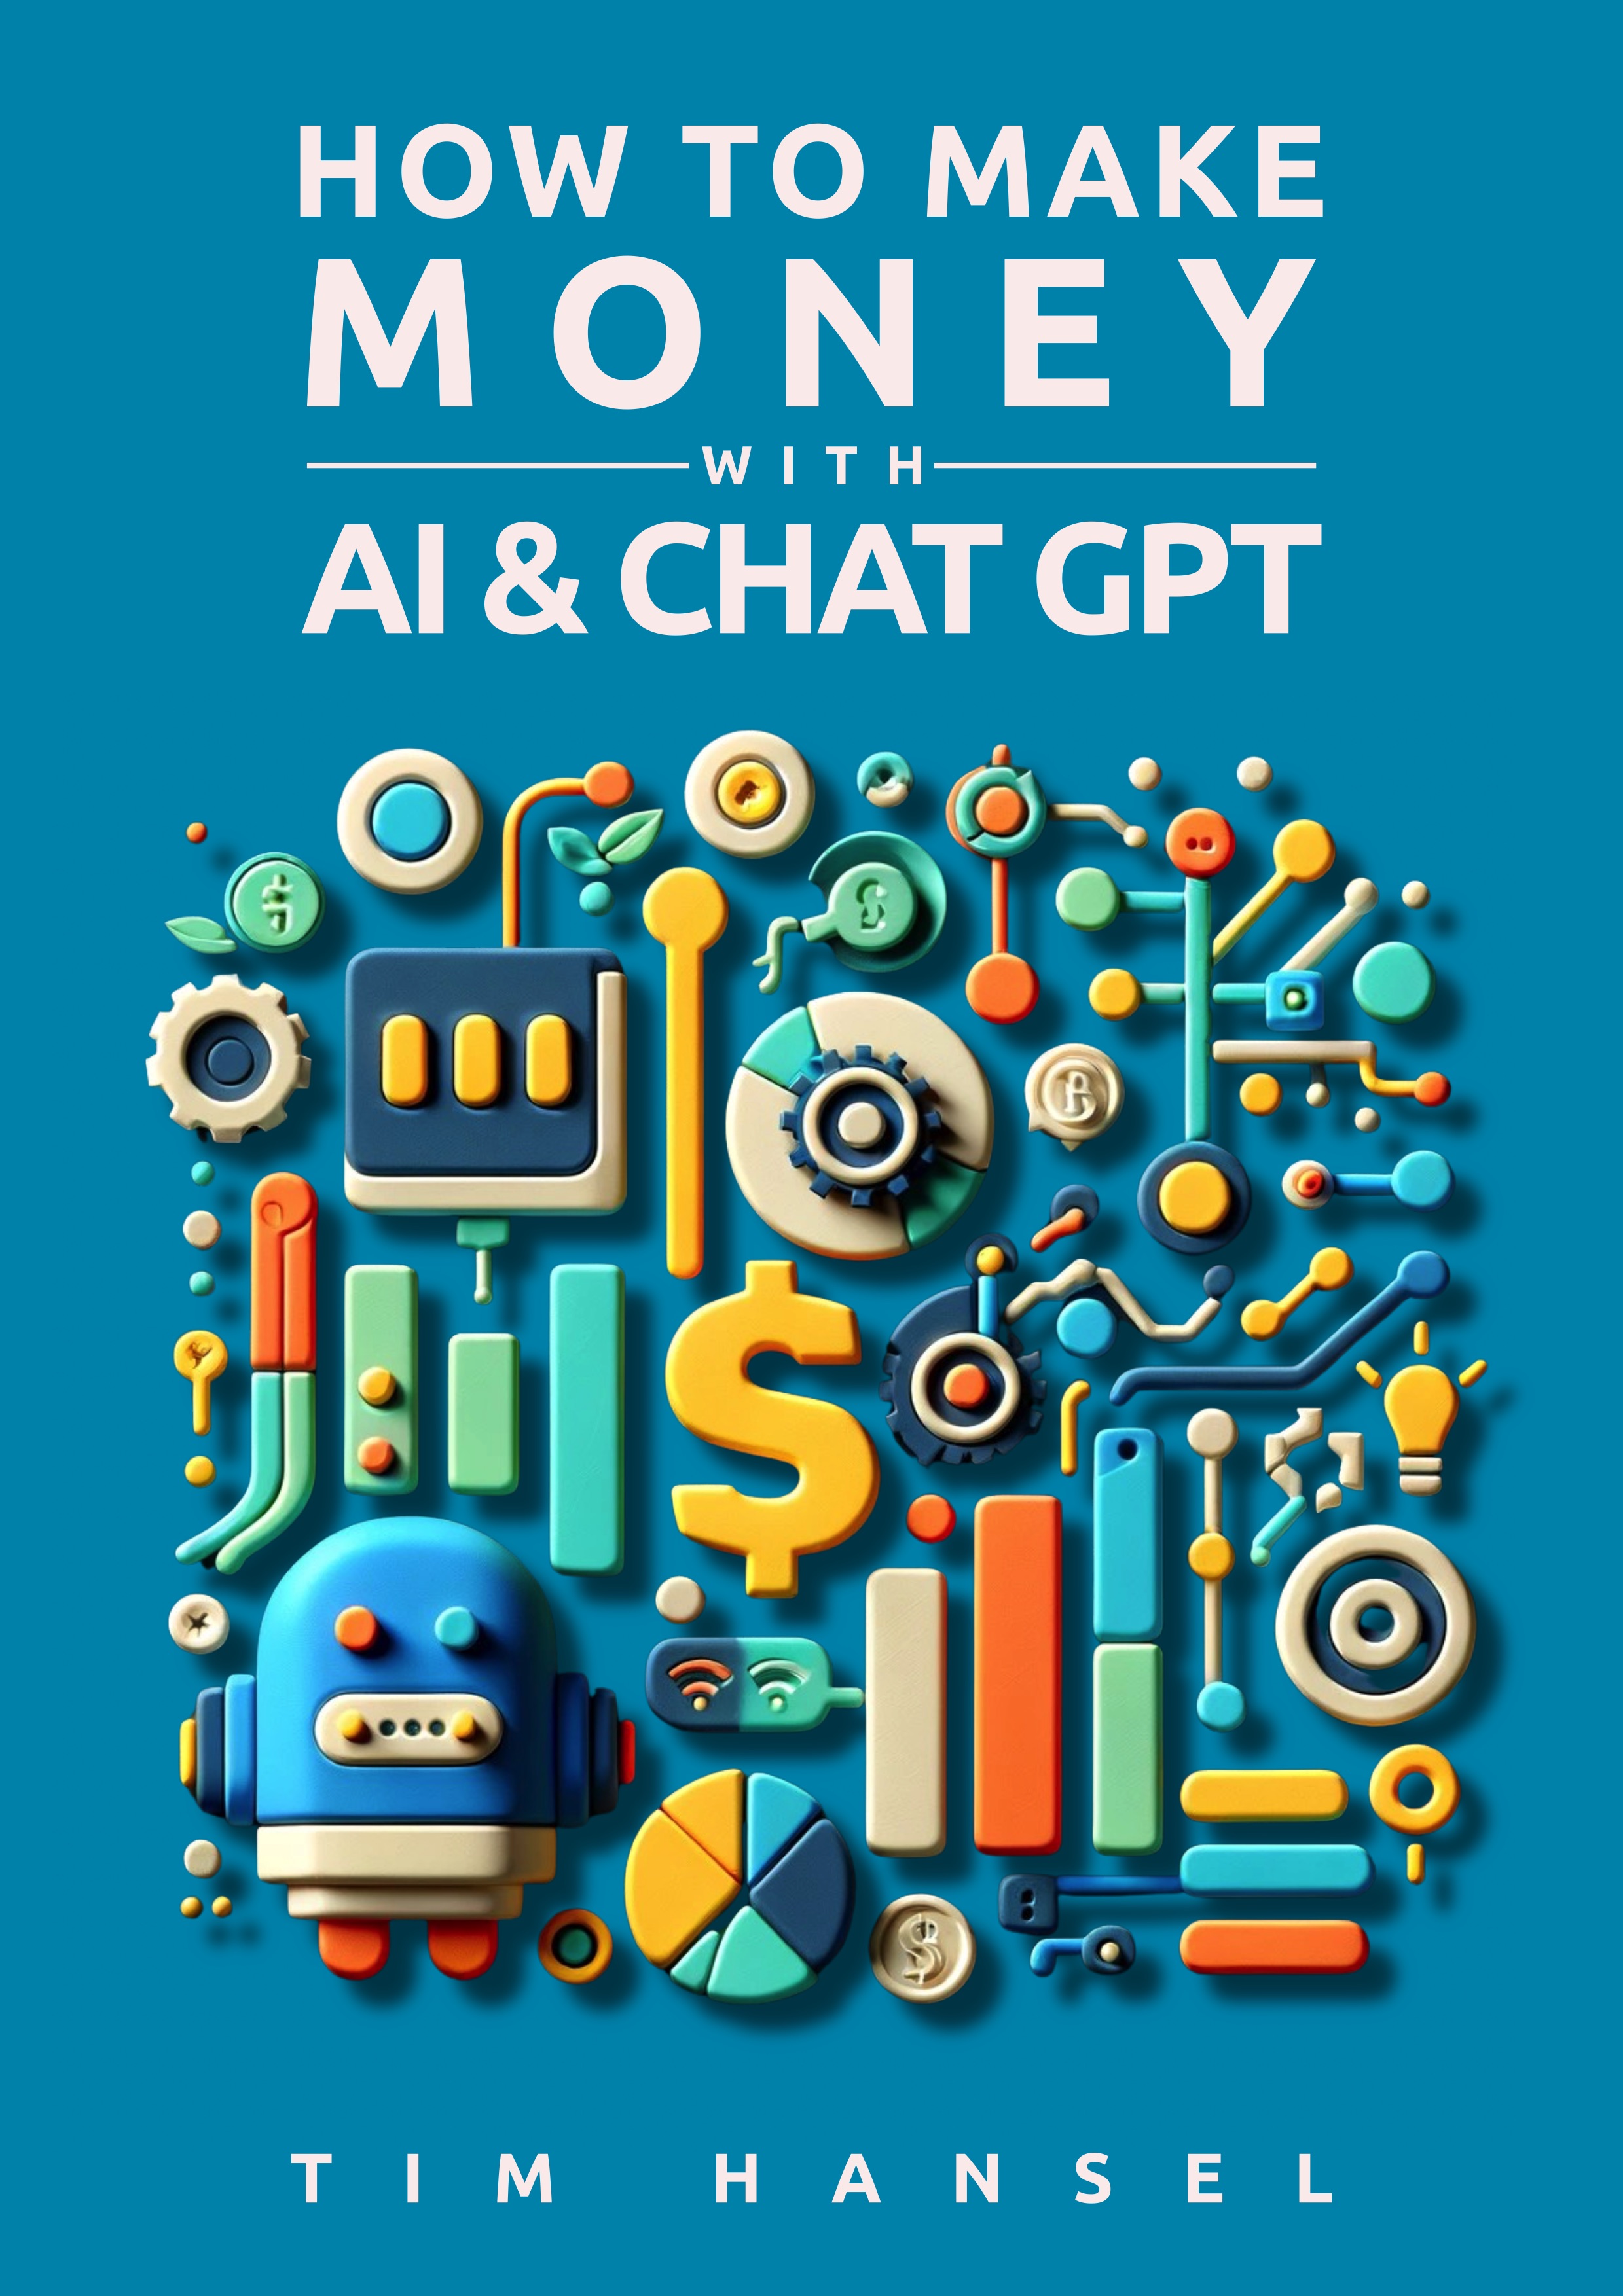 New Book Release: "How to Make Money with AI & Chat GPT: The Ultimate Side Hustle Idea" Offers Readers a Gateway to Financial Freedom through AI-Driven Side Hustles